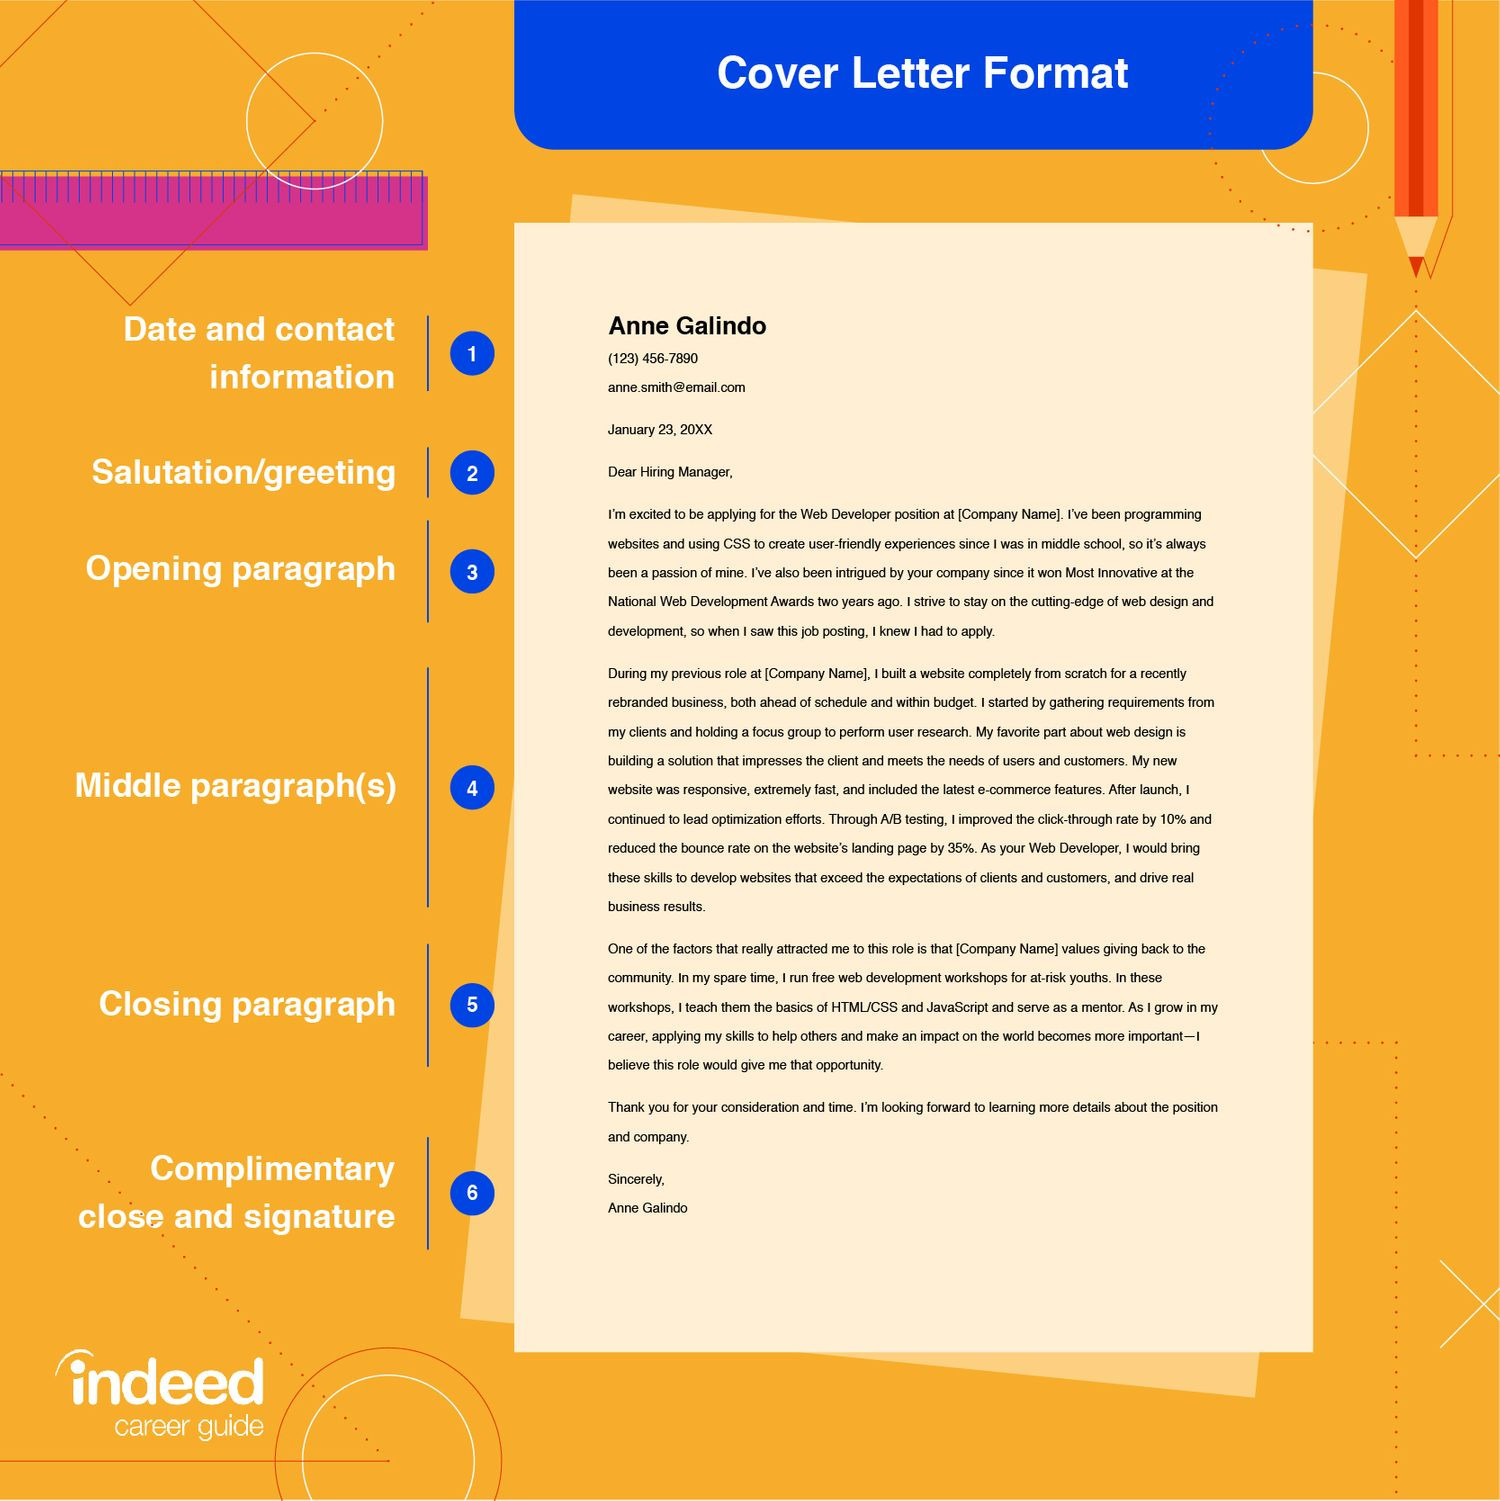 Sample Cover Email Letter Resume attached How to Send An Email Cover Letter (with Example) Indeed.com